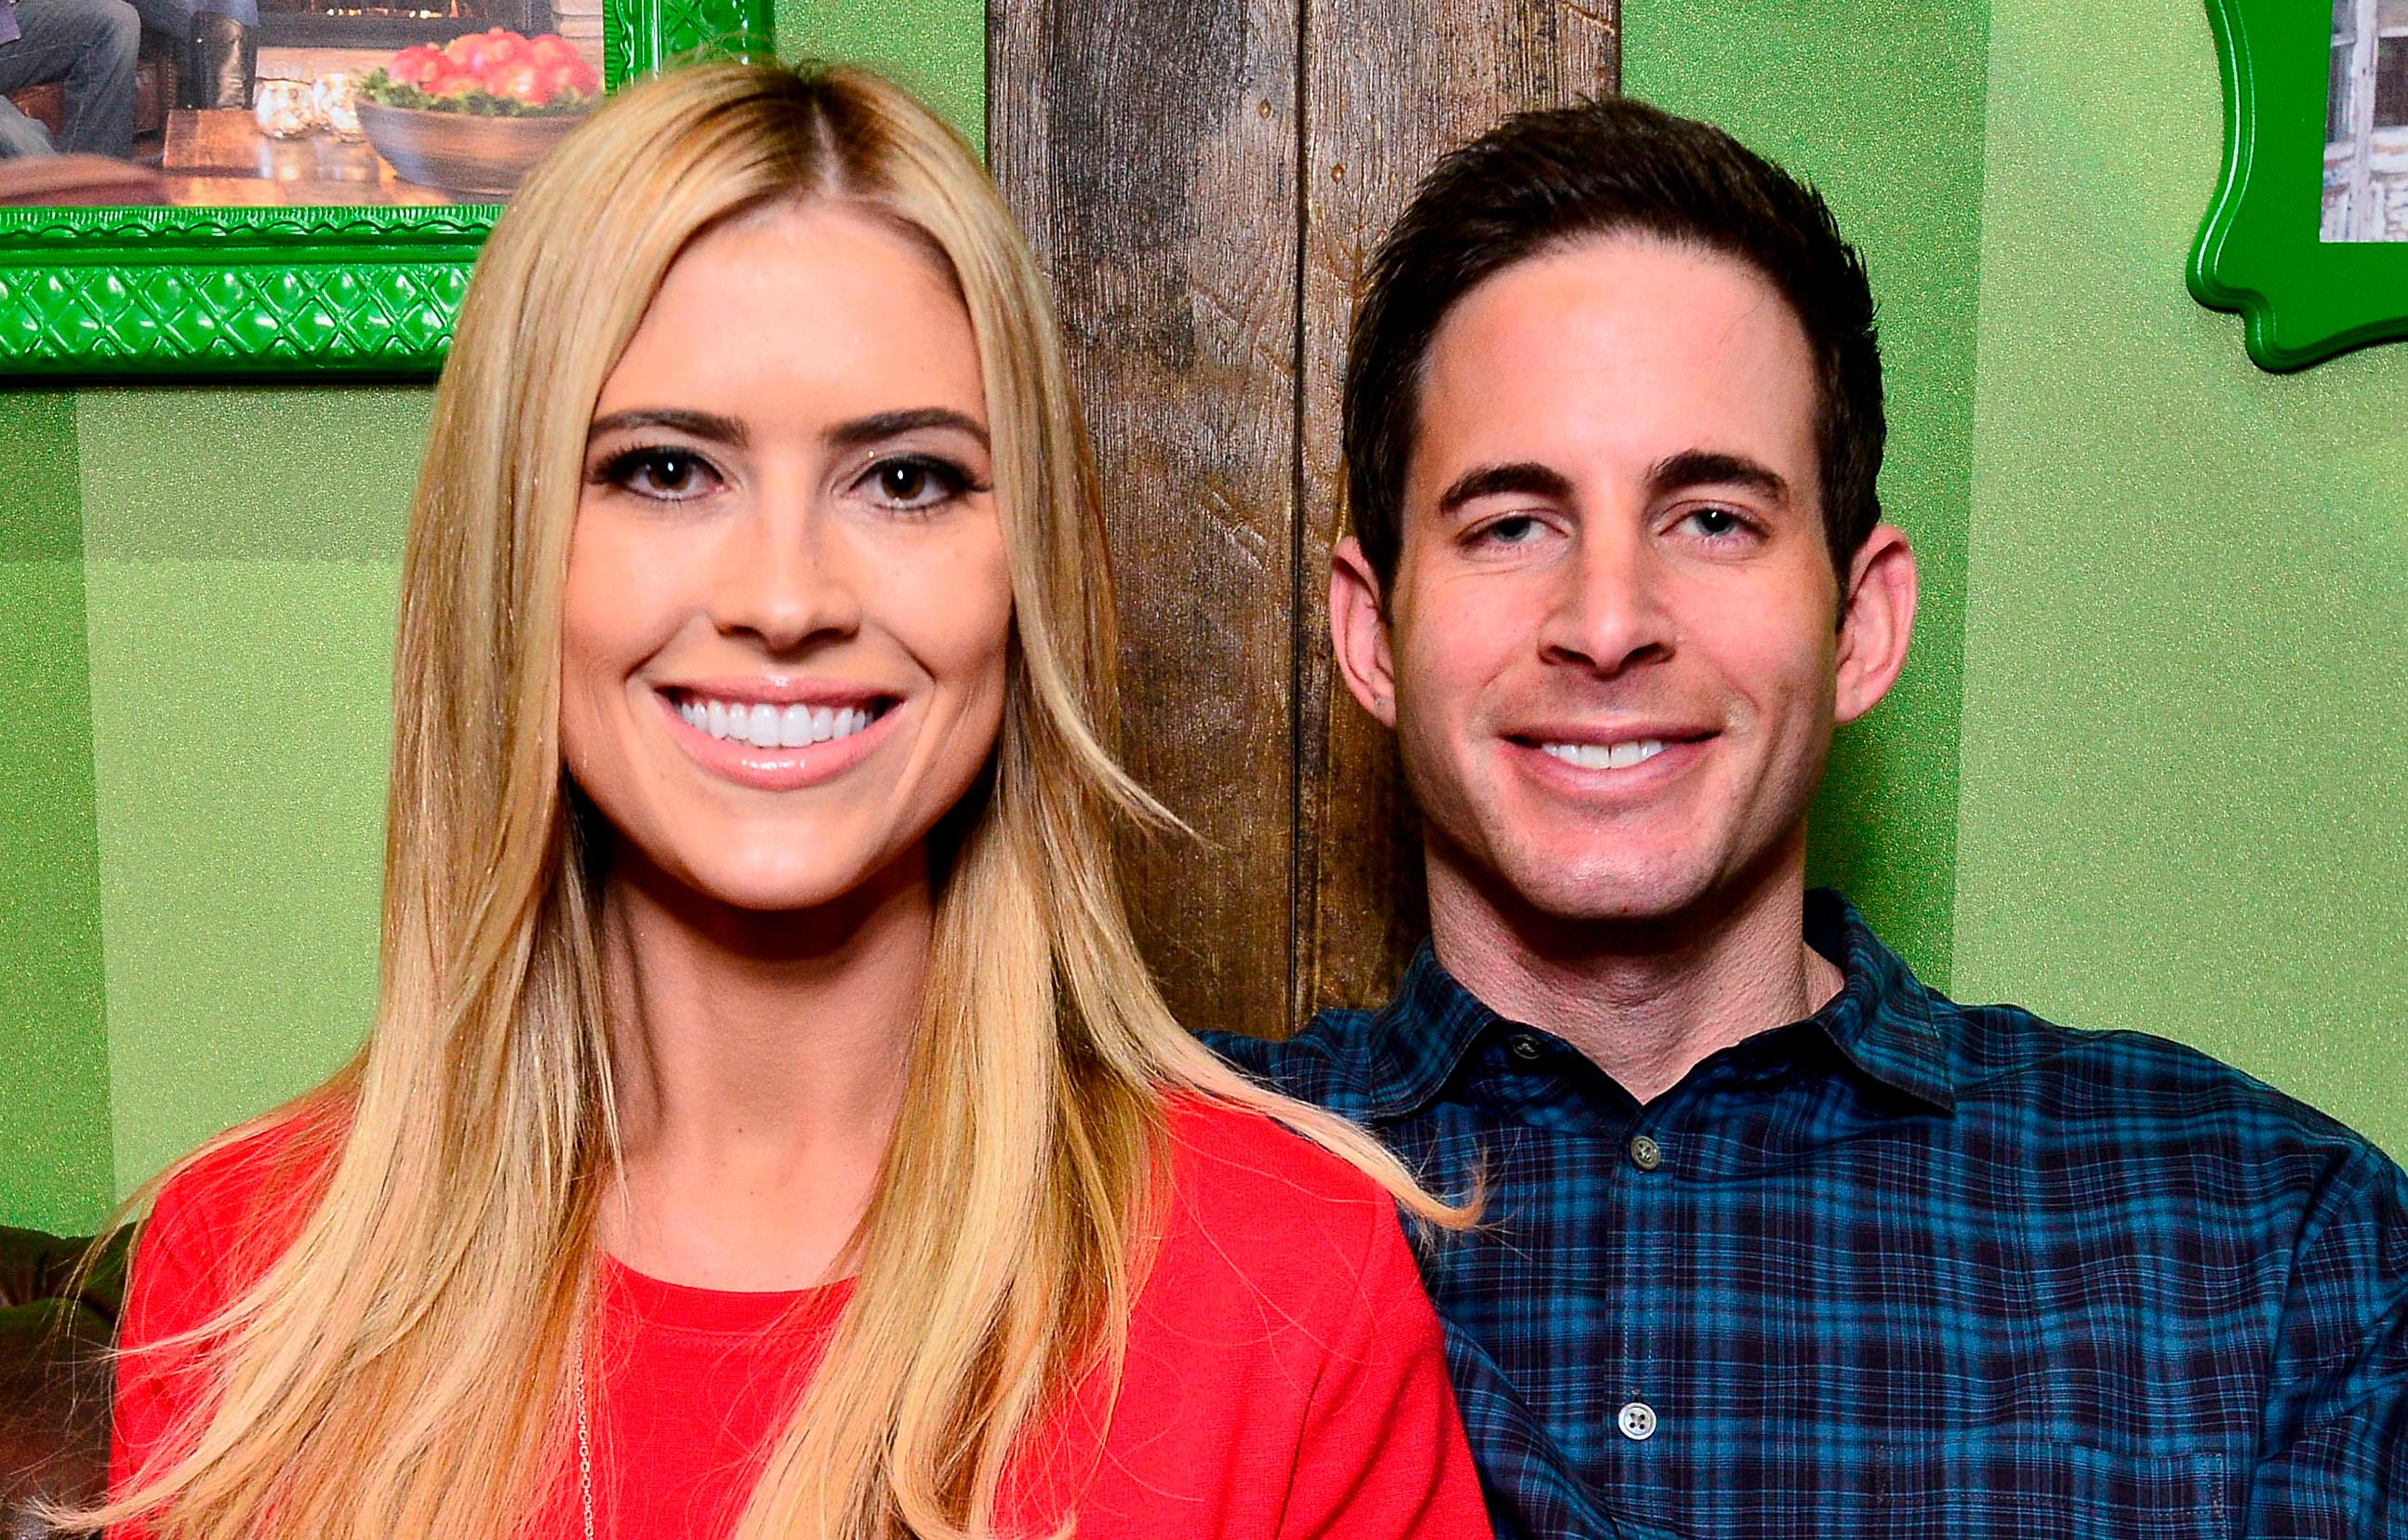 christian tirta recommends flip or flop chick pic